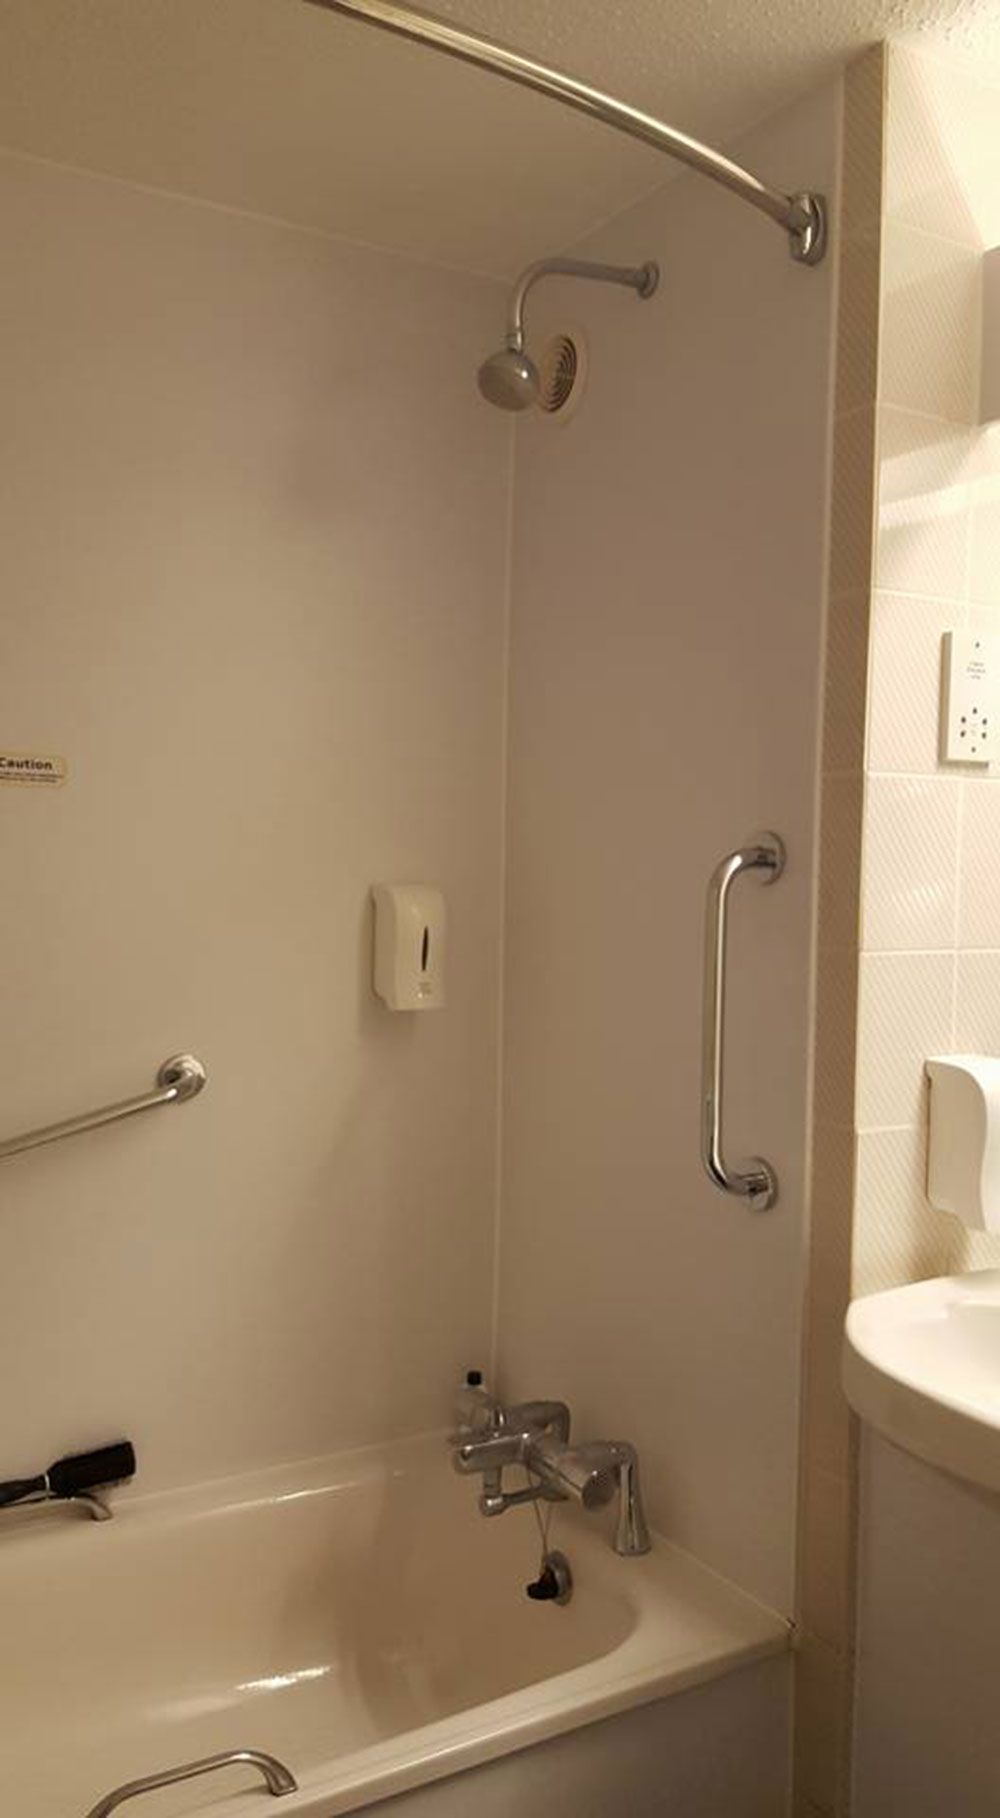 Woman finds hidden camera in Travelodge room while taking a shower